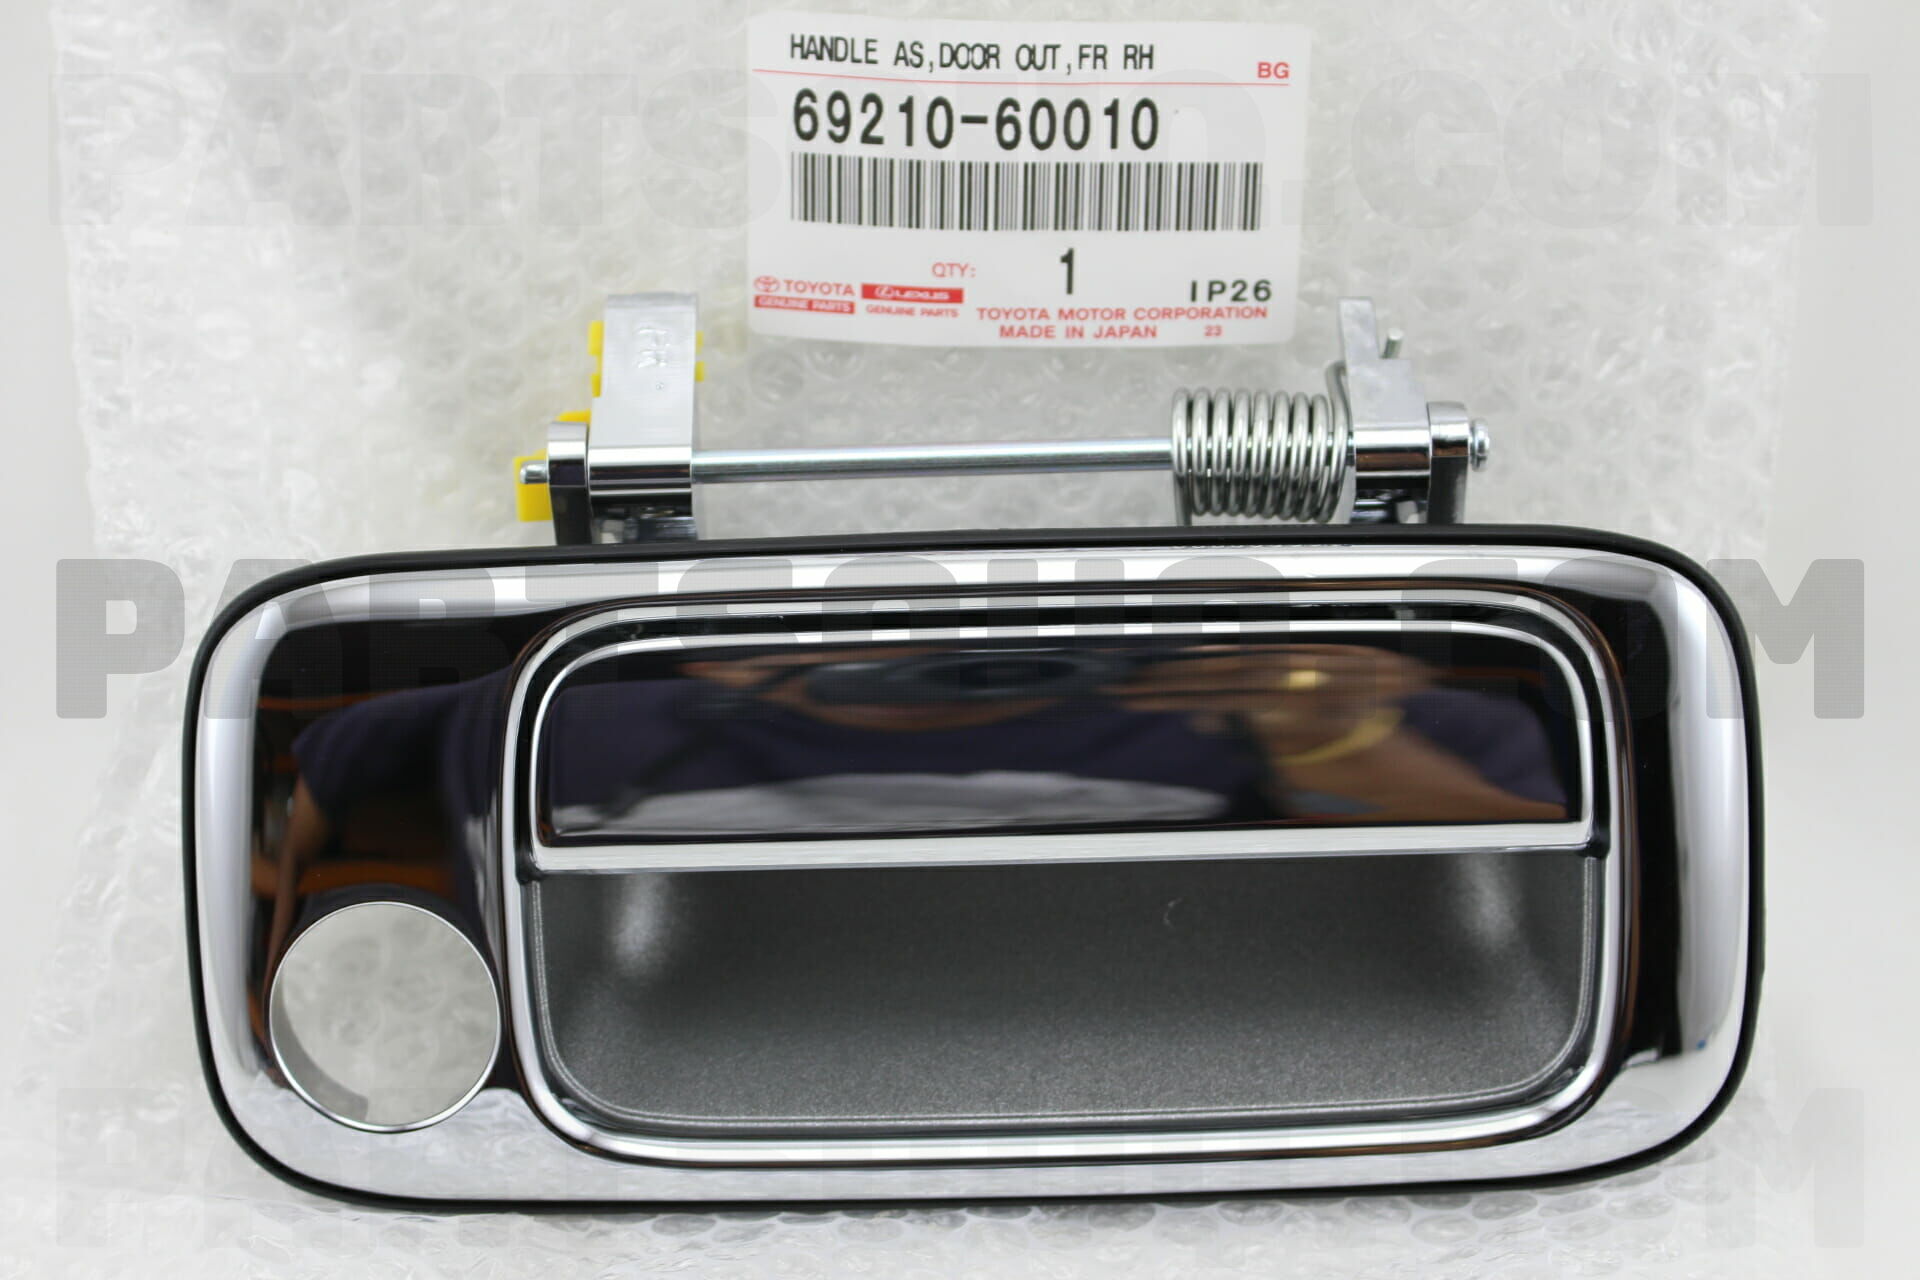 HANDLE ASSY, FRONT DOOR, OUTSIDE RH 6921060010 | Toyota Parts 